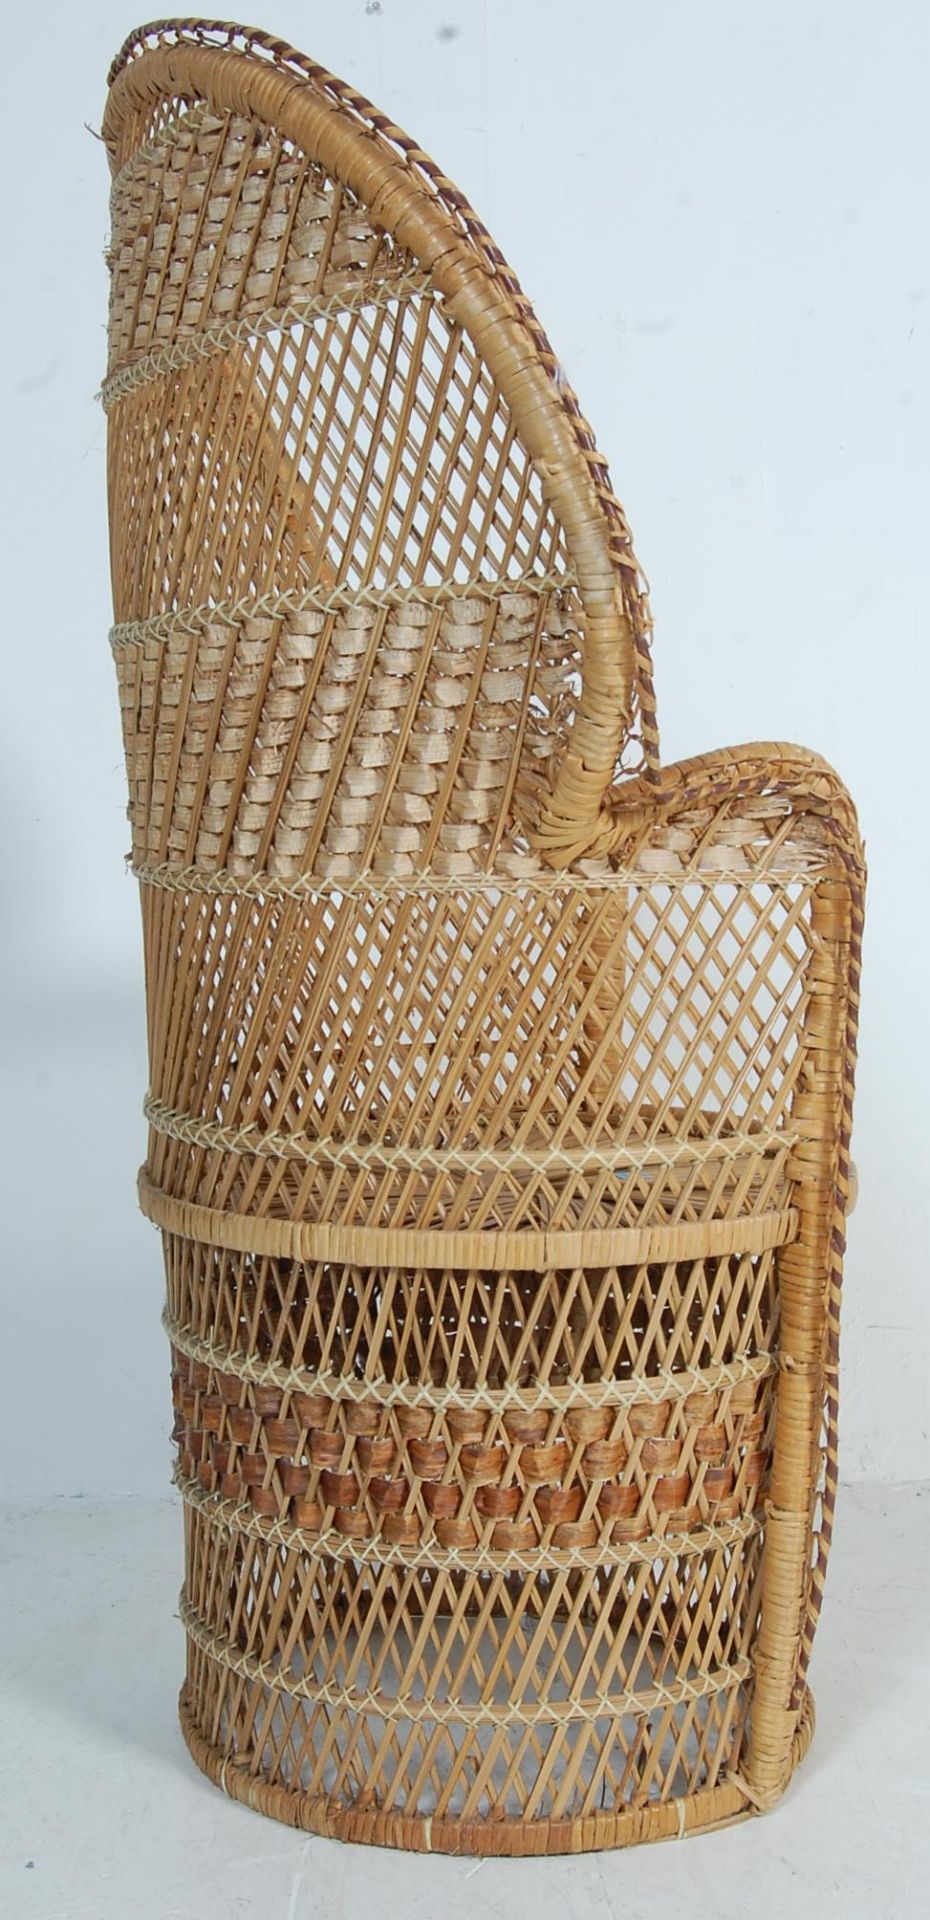 VINTAGE RETRO WICKER CONSERVATORY CHAIR - Image 5 of 6